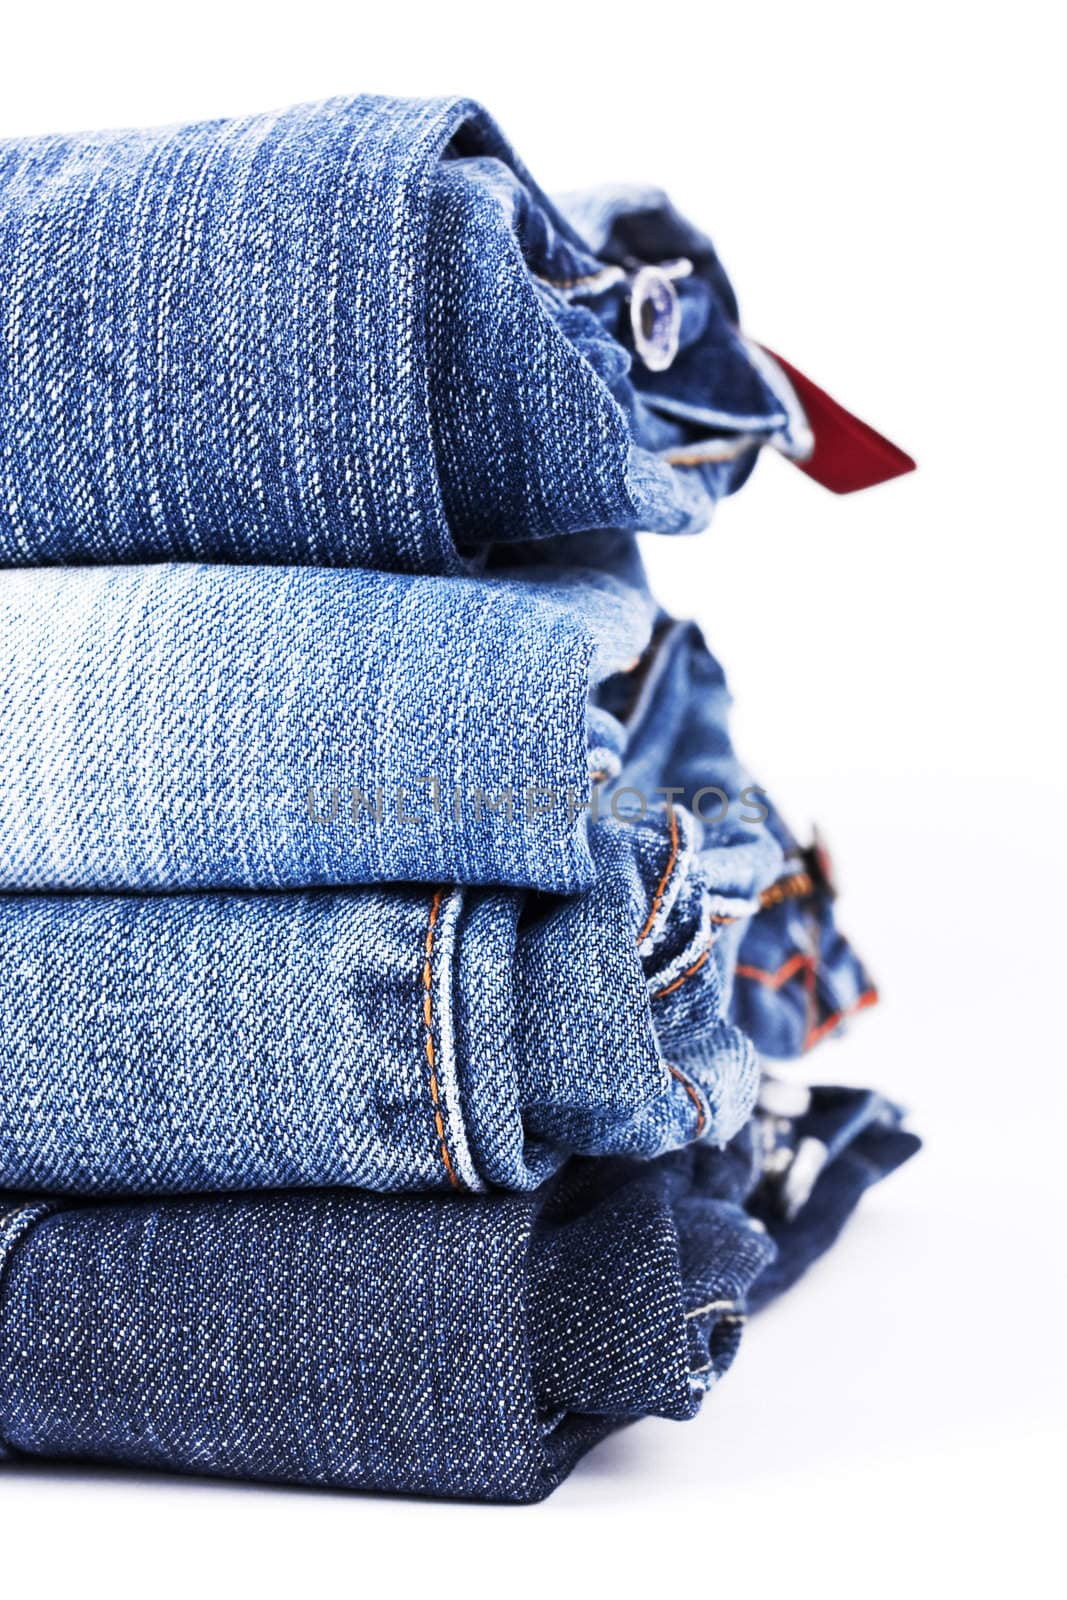 Stack of Blue Jeans by rozhenyuk